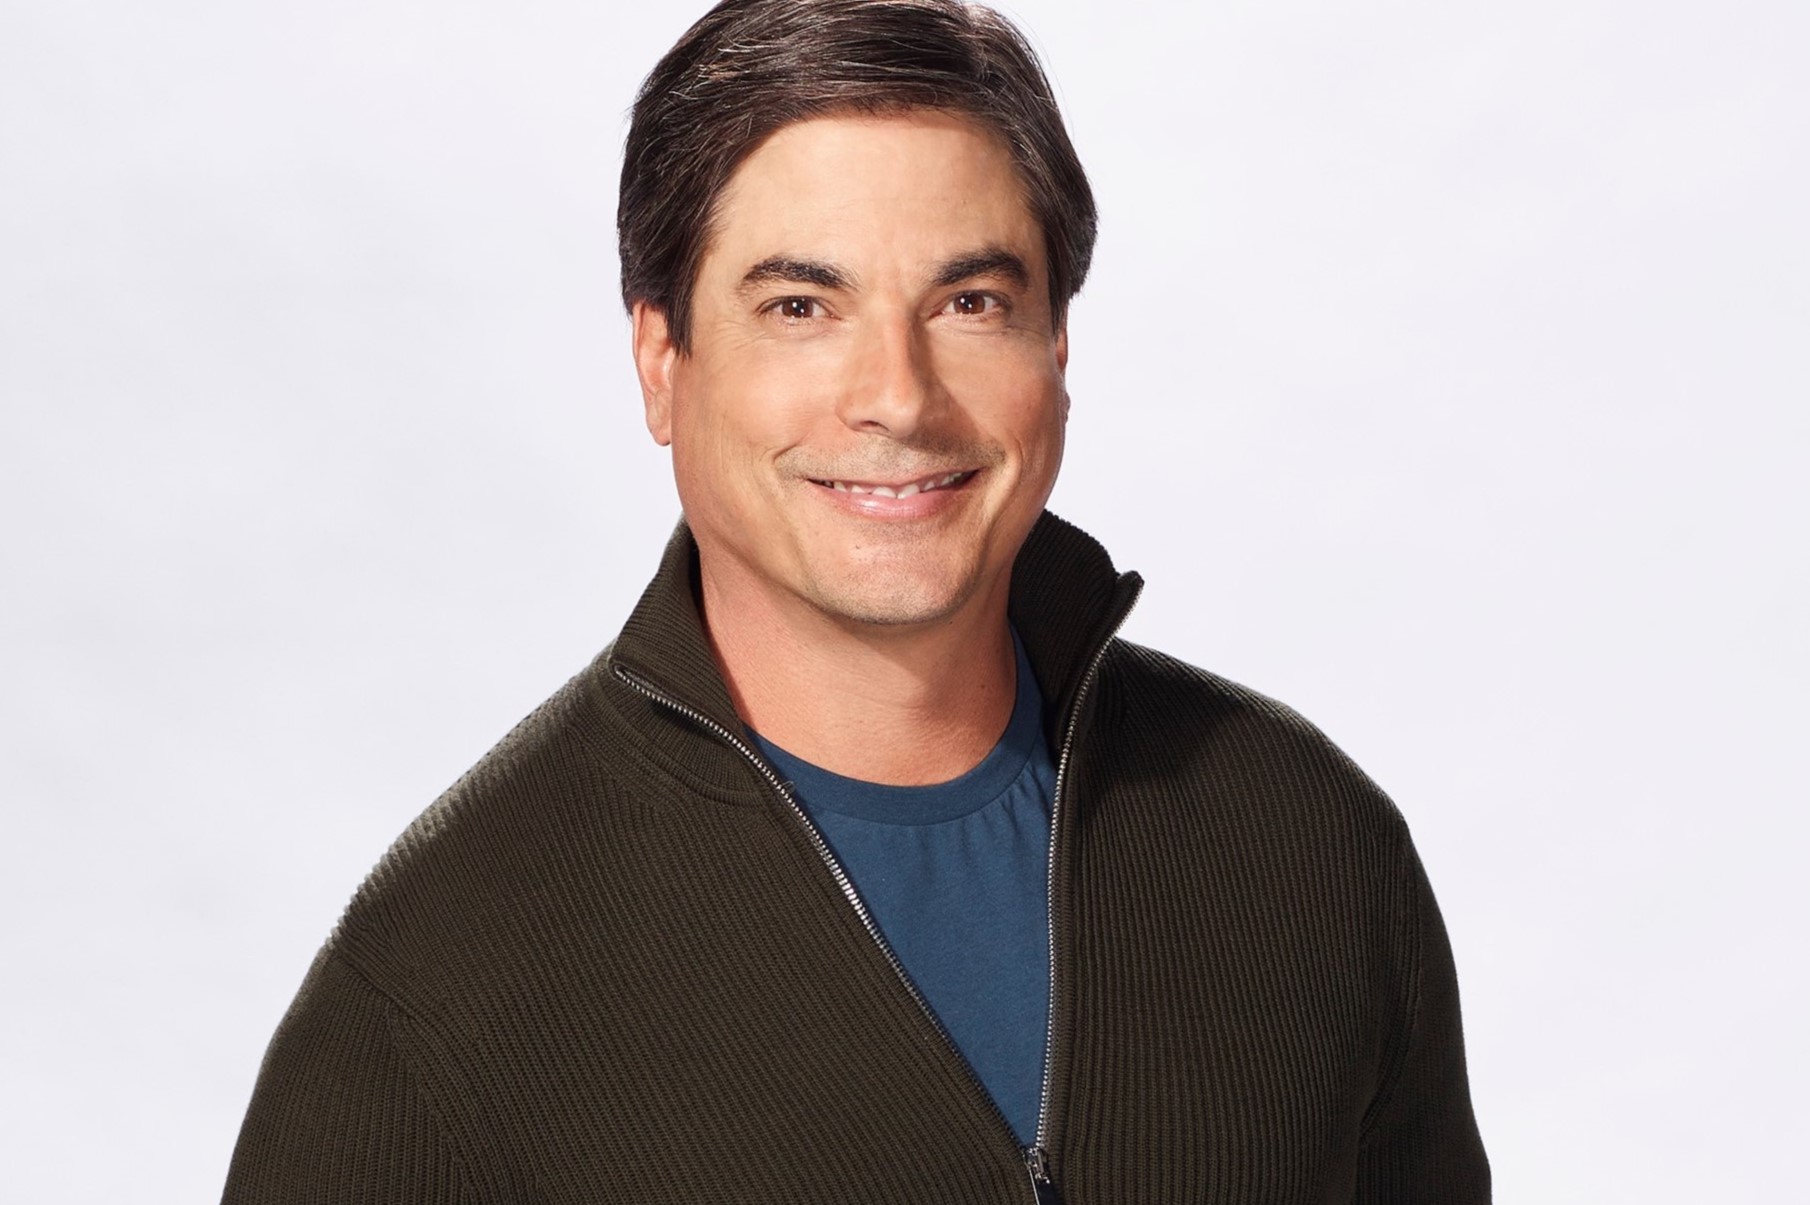 24-extraordinary-facts-about-bryan-dattilo